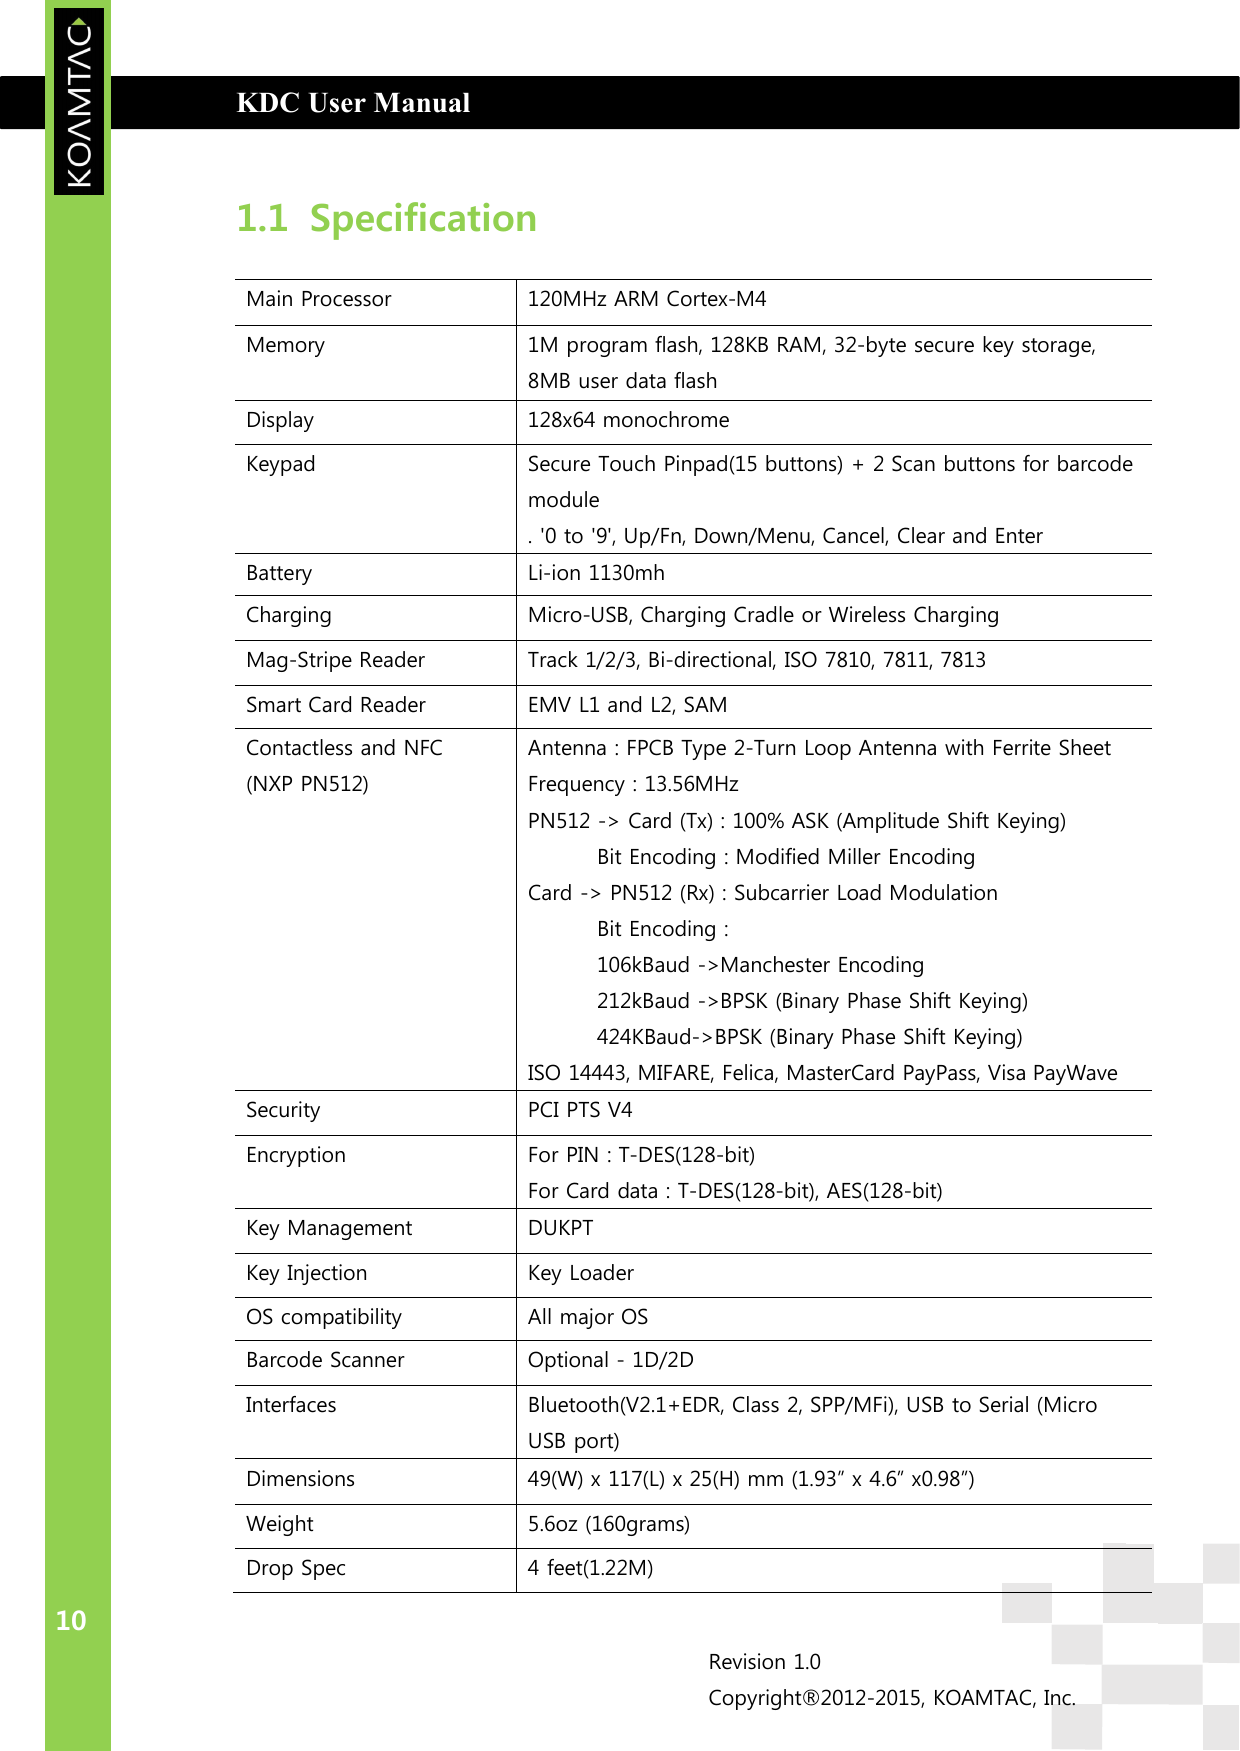  KDC User Manual                                                                         INTRODUCTION 10 Revision 1.0 Copyright®2012-2015, KOAMTAC, Inc.  1.1 Specification   Main Processor  120MHz ARM Cortex-M4 Memory  1M program flash, 128KB RAM, 32-byte secure key storage, 8MB user data flash Display  128x64 monochrome Keypad  Secure Touch Pinpad(15 buttons) + 2 Scan buttons for barcode module . &apos;0 to &apos;9&apos;, Up/Fn, Down/Menu, Cancel, Clear and Enter Battery  Li-ion 1130mh Charging  Micro-USB, Charging Cradle or Wireless Charging Mag-Stripe Reader  Track 1/2/3, Bi-directional, ISO 7810, 7811, 7813 Smart Card Reader  EMV L1 and L2, SAM Contactless and NFC (NXP PN512) Antenna : FPCB Type 2-Turn Loop Antenna with Ferrite Sheet Frequency : 13.56MHz PN512 -&gt; Card (Tx) : 100% ASK (Amplitude Shift Keying) Bit Encoding : Modified Miller Encoding Card -&gt; PN512 (Rx) : Subcarrier Load Modulation Bit Encoding :  106kBaud -&gt;Manchester Encoding 212kBaud -&gt;BPSK (Binary Phase Shift Keying) 424KBaud-&gt;BPSK (Binary Phase Shift Keying) ISO 14443, MIFARE, Felica, MasterCard PayPass, Visa PayWave Security  PCI PTS V4 Encryption  For PIN : T-DES(128-bit) For Card data : T-DES(128-bit), AES(128-bit) Key Management  DUKPT Key Injection  Key Loader OS compatibility  All major OS Barcode Scanner  Optional - 1D/2D Interfaces  Bluetooth(V2.1+EDR, Class 2, SPP/MFi), USB to Serial (Micro USB port) Dimensions  49(W) x 117(L) x 25(H) mm (1.93” x 4.6” x0.98”) Weight  5.6oz (160grams) Drop Spec  4 feet(1.22M) 